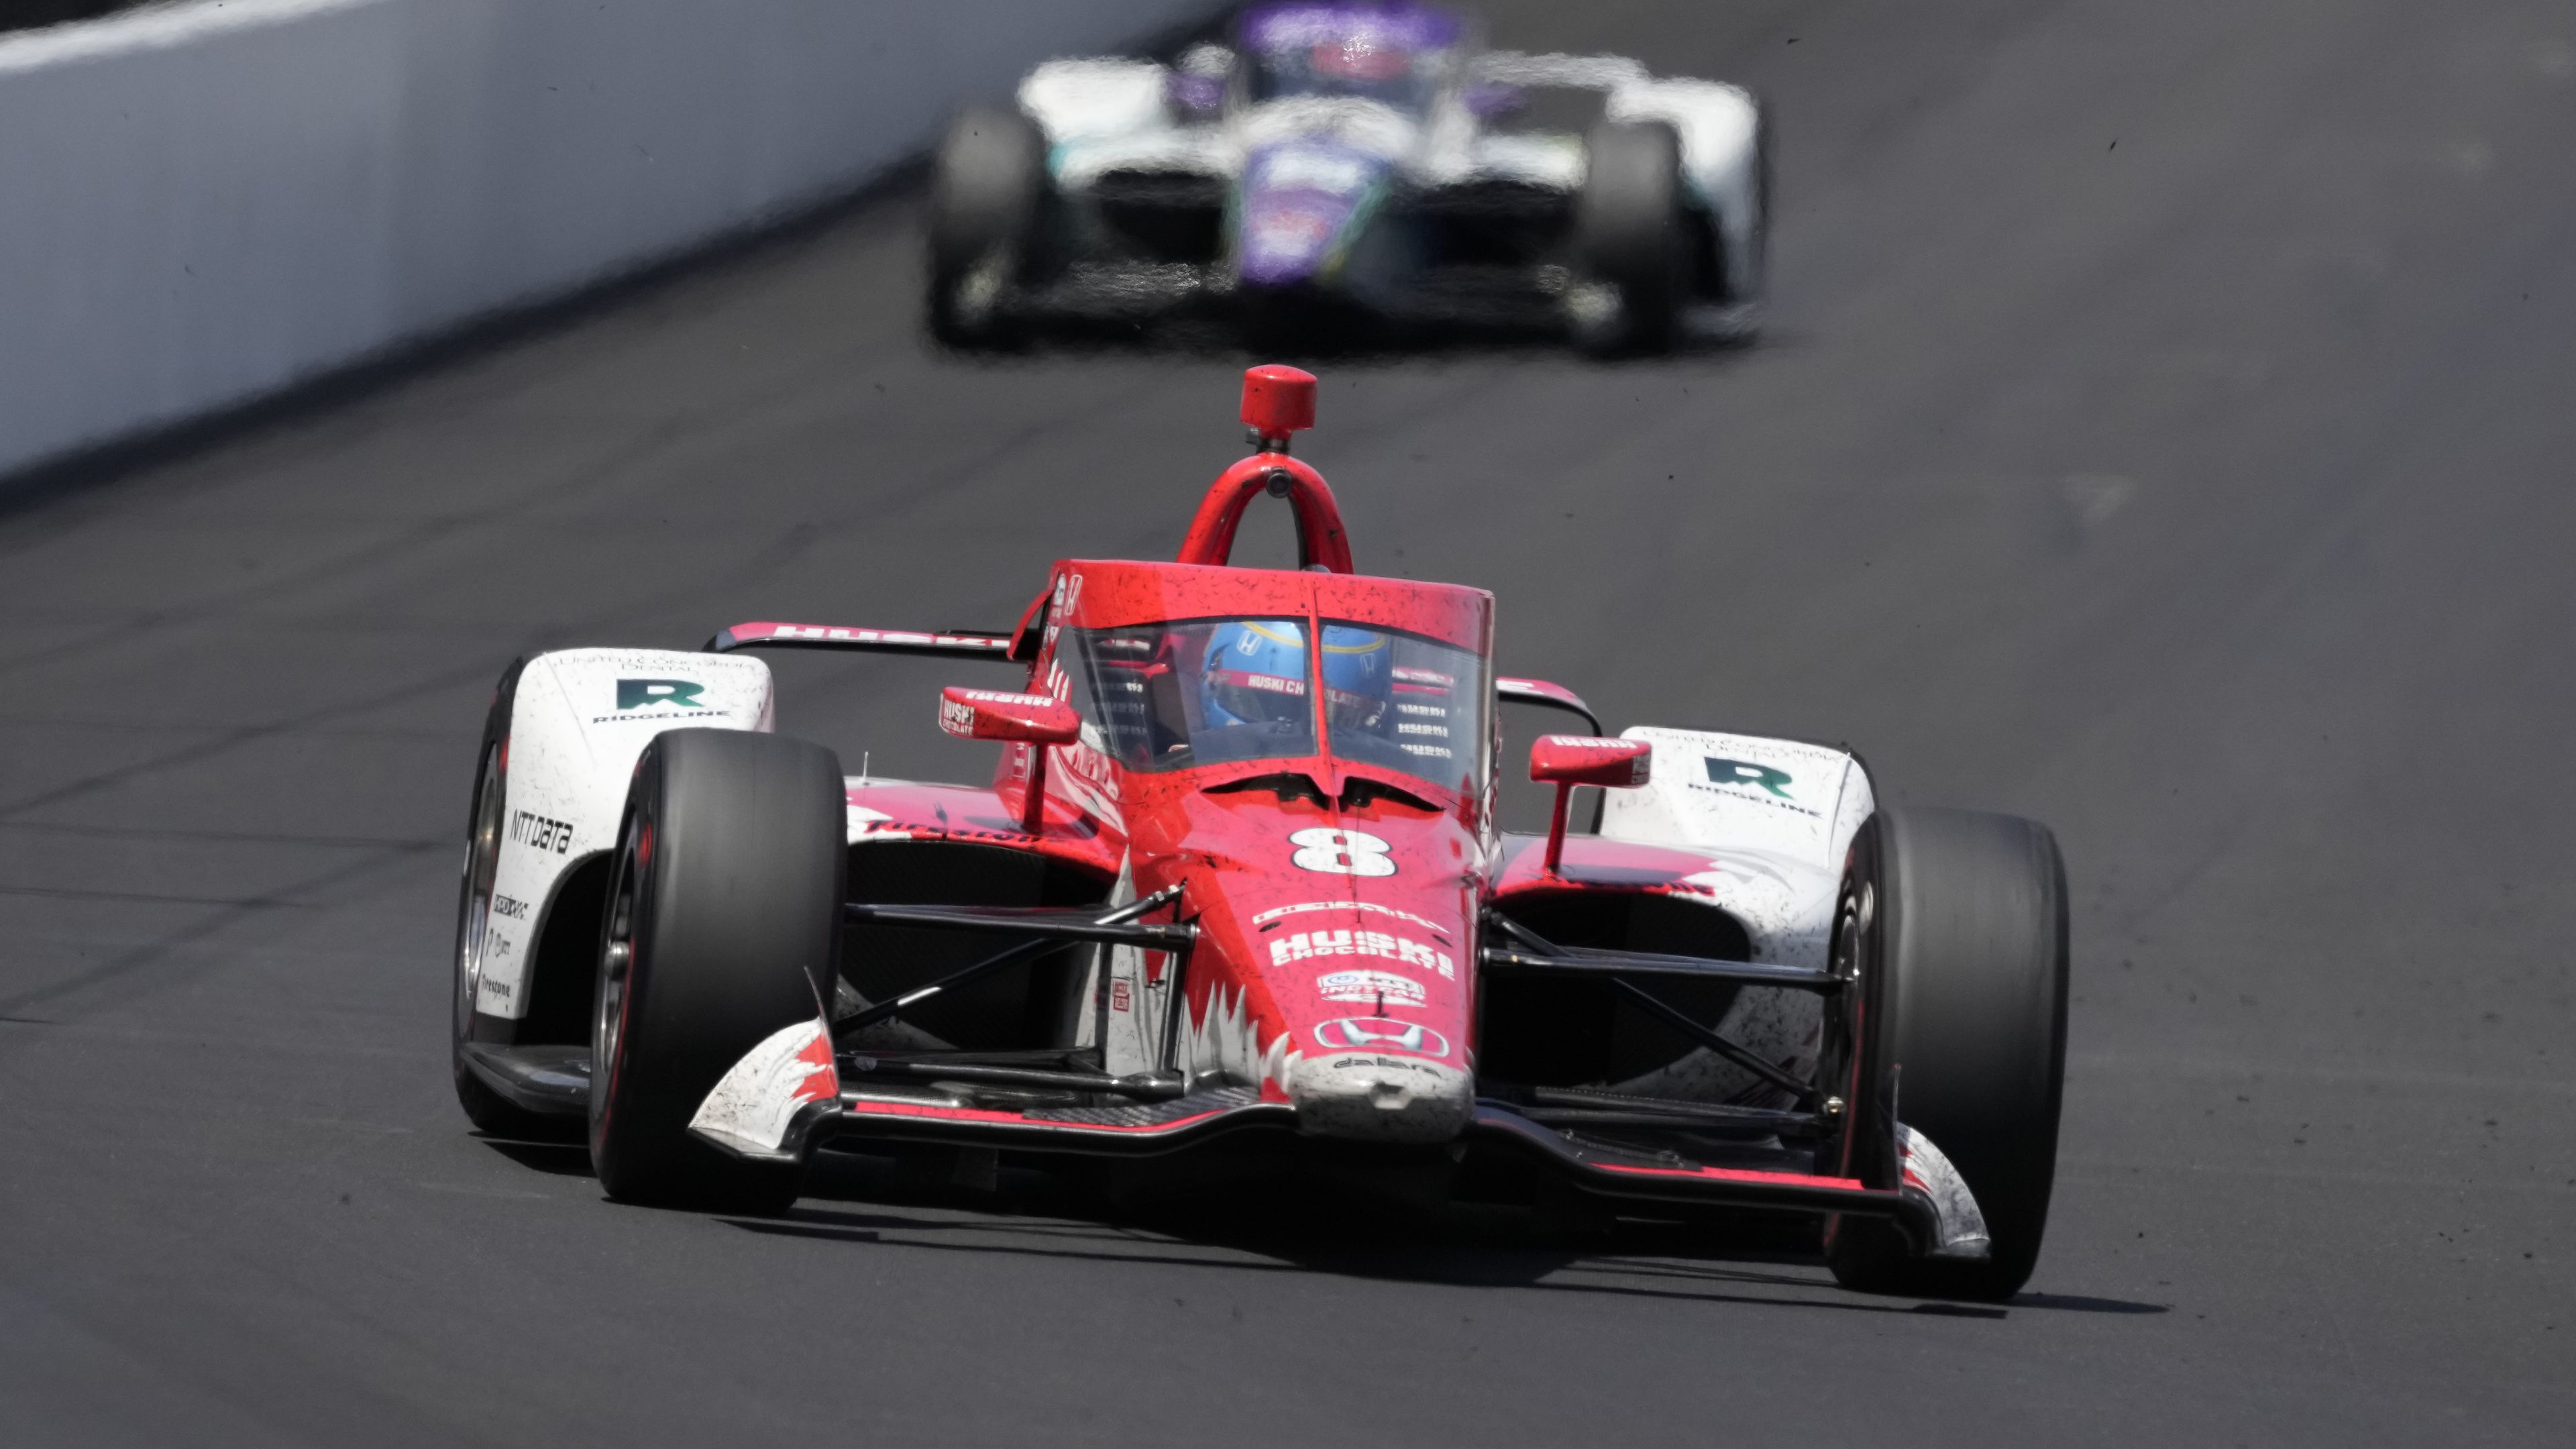 Marcus Ericsson drives down the front straightaway during the 106th running of the Indianapolis 500 at the Indianapolis Motor Speedway.